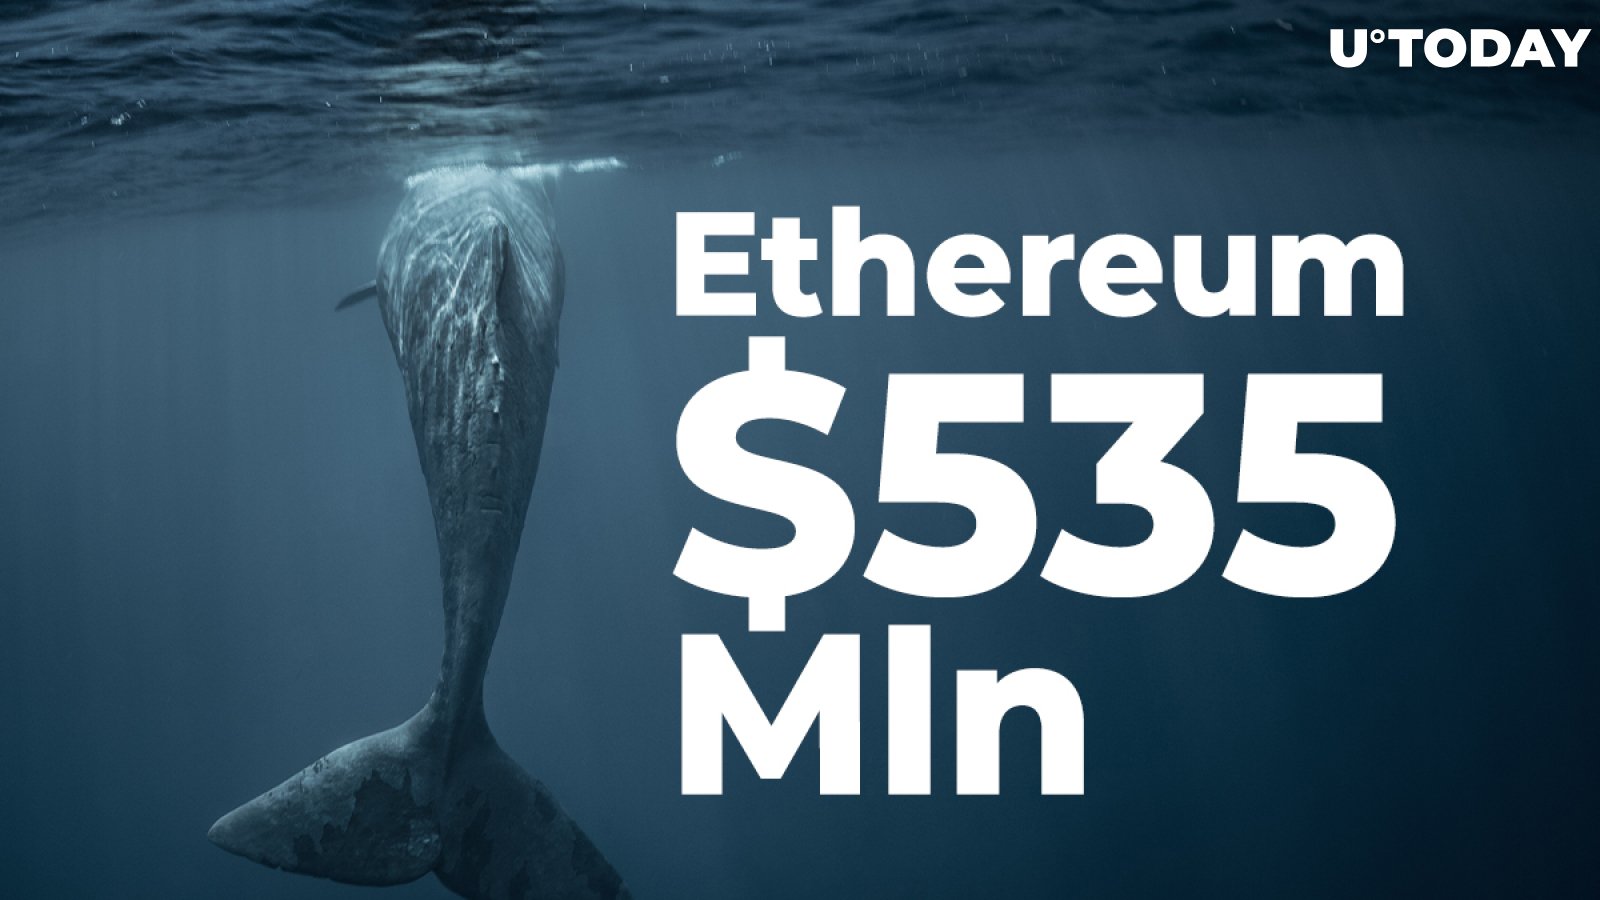 Whales Shift $535 Mln Worth of Ethereum as ETH Trades at $515 High 